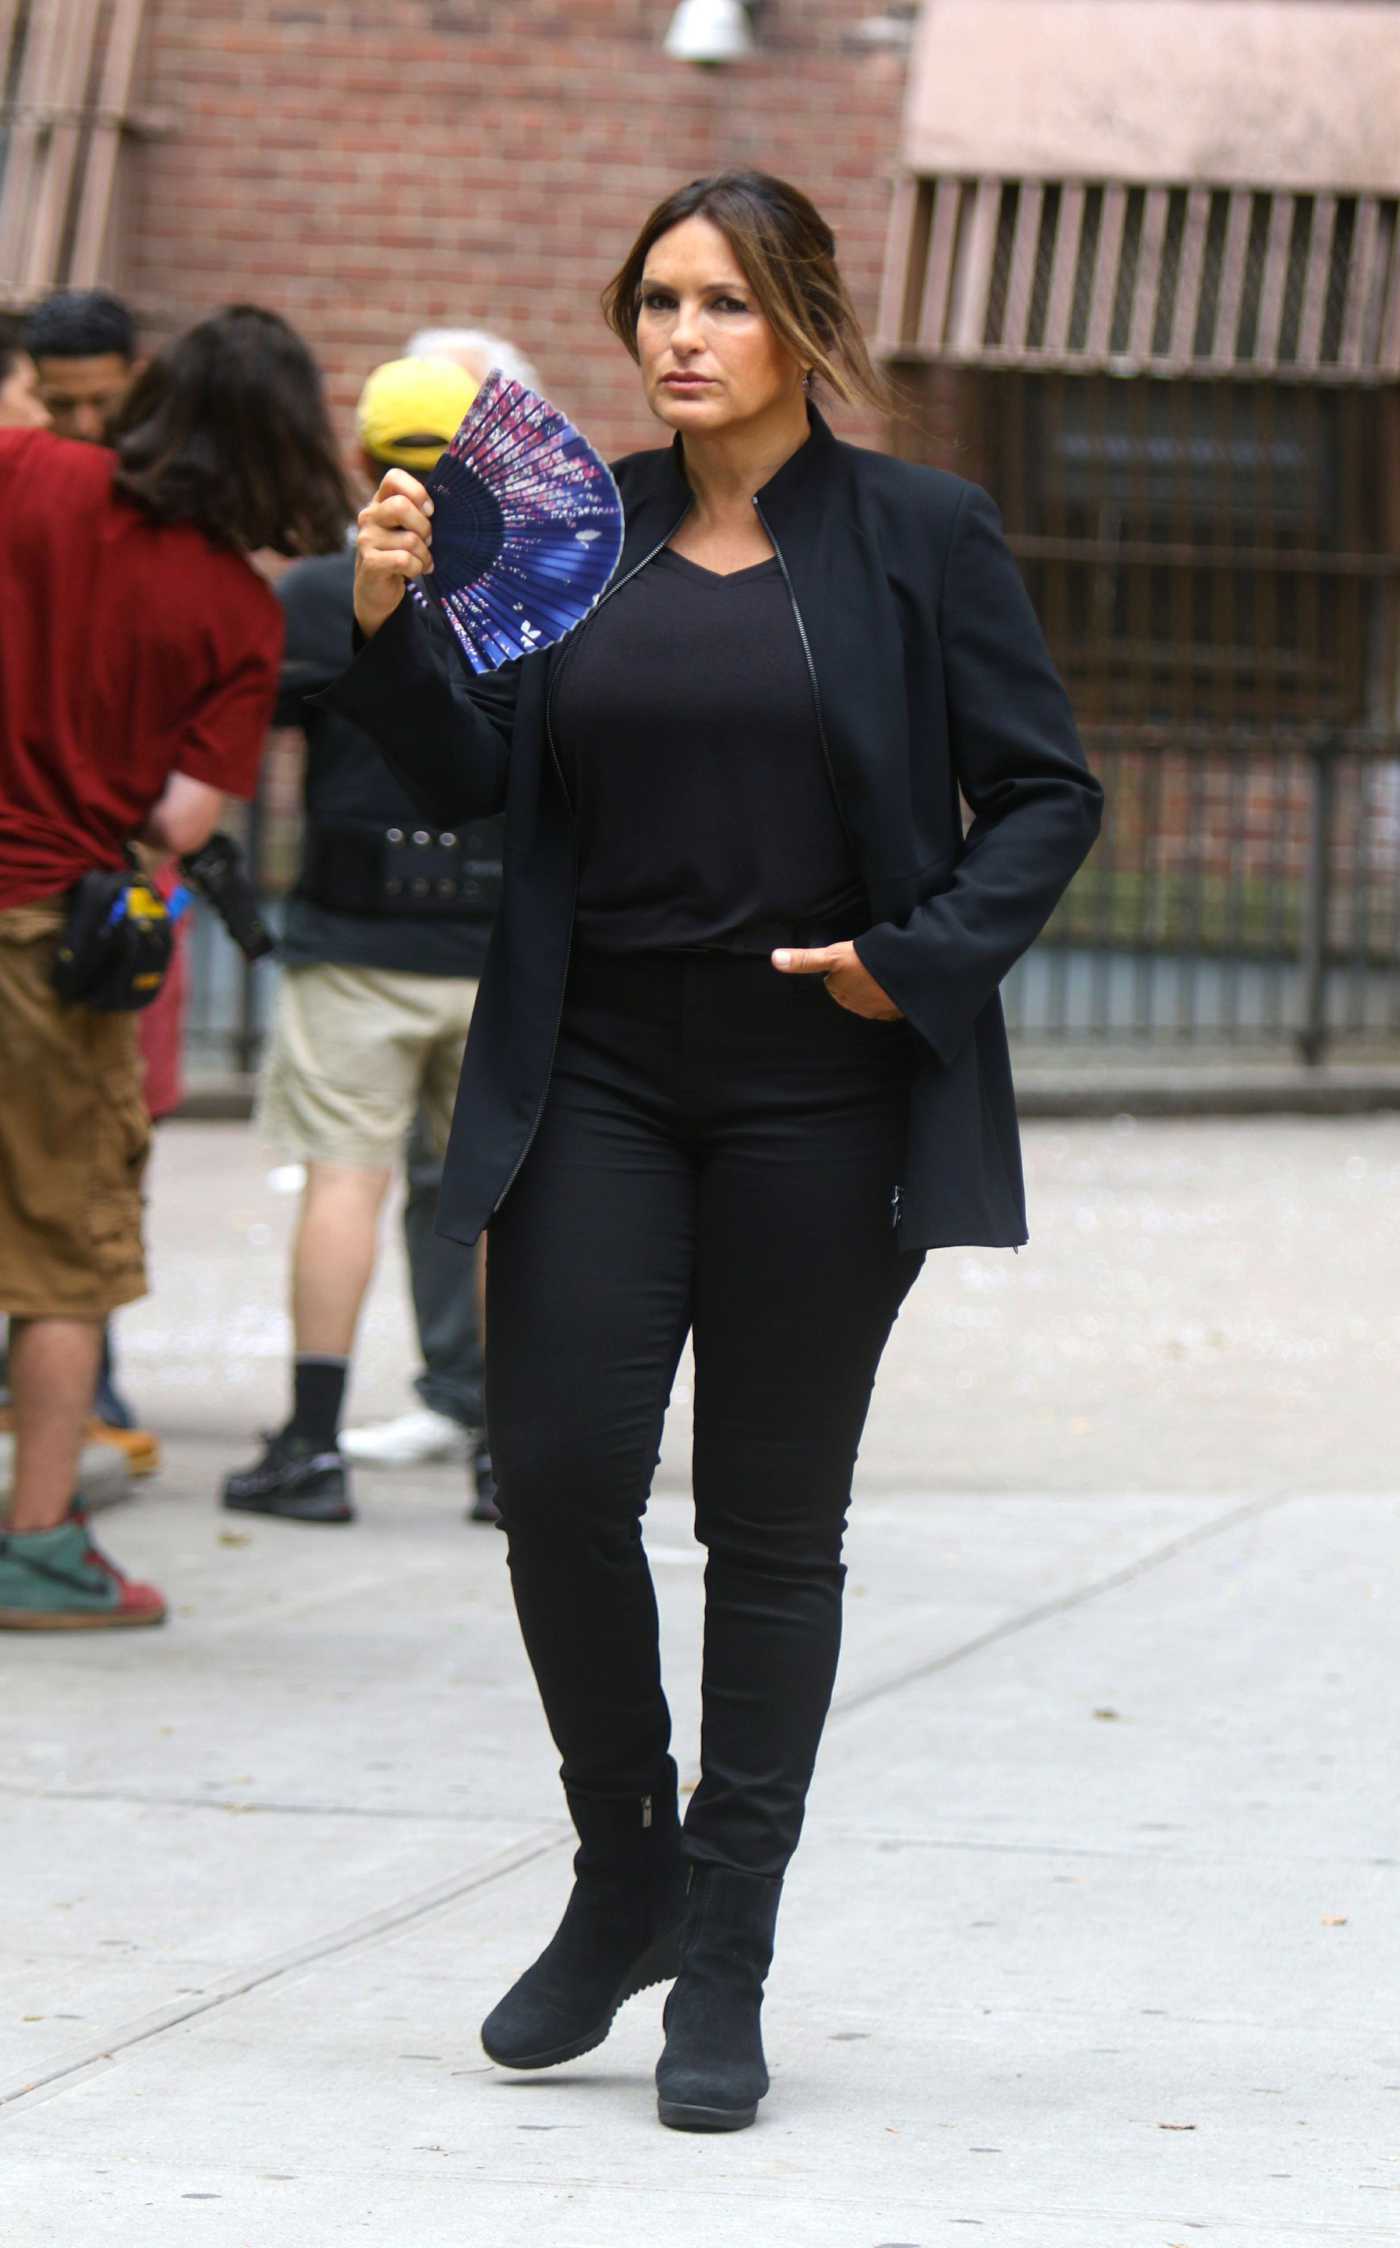 Mariska Hargitay on the Set of Law and Order: Special Victims Unit in New York 07/12/2019